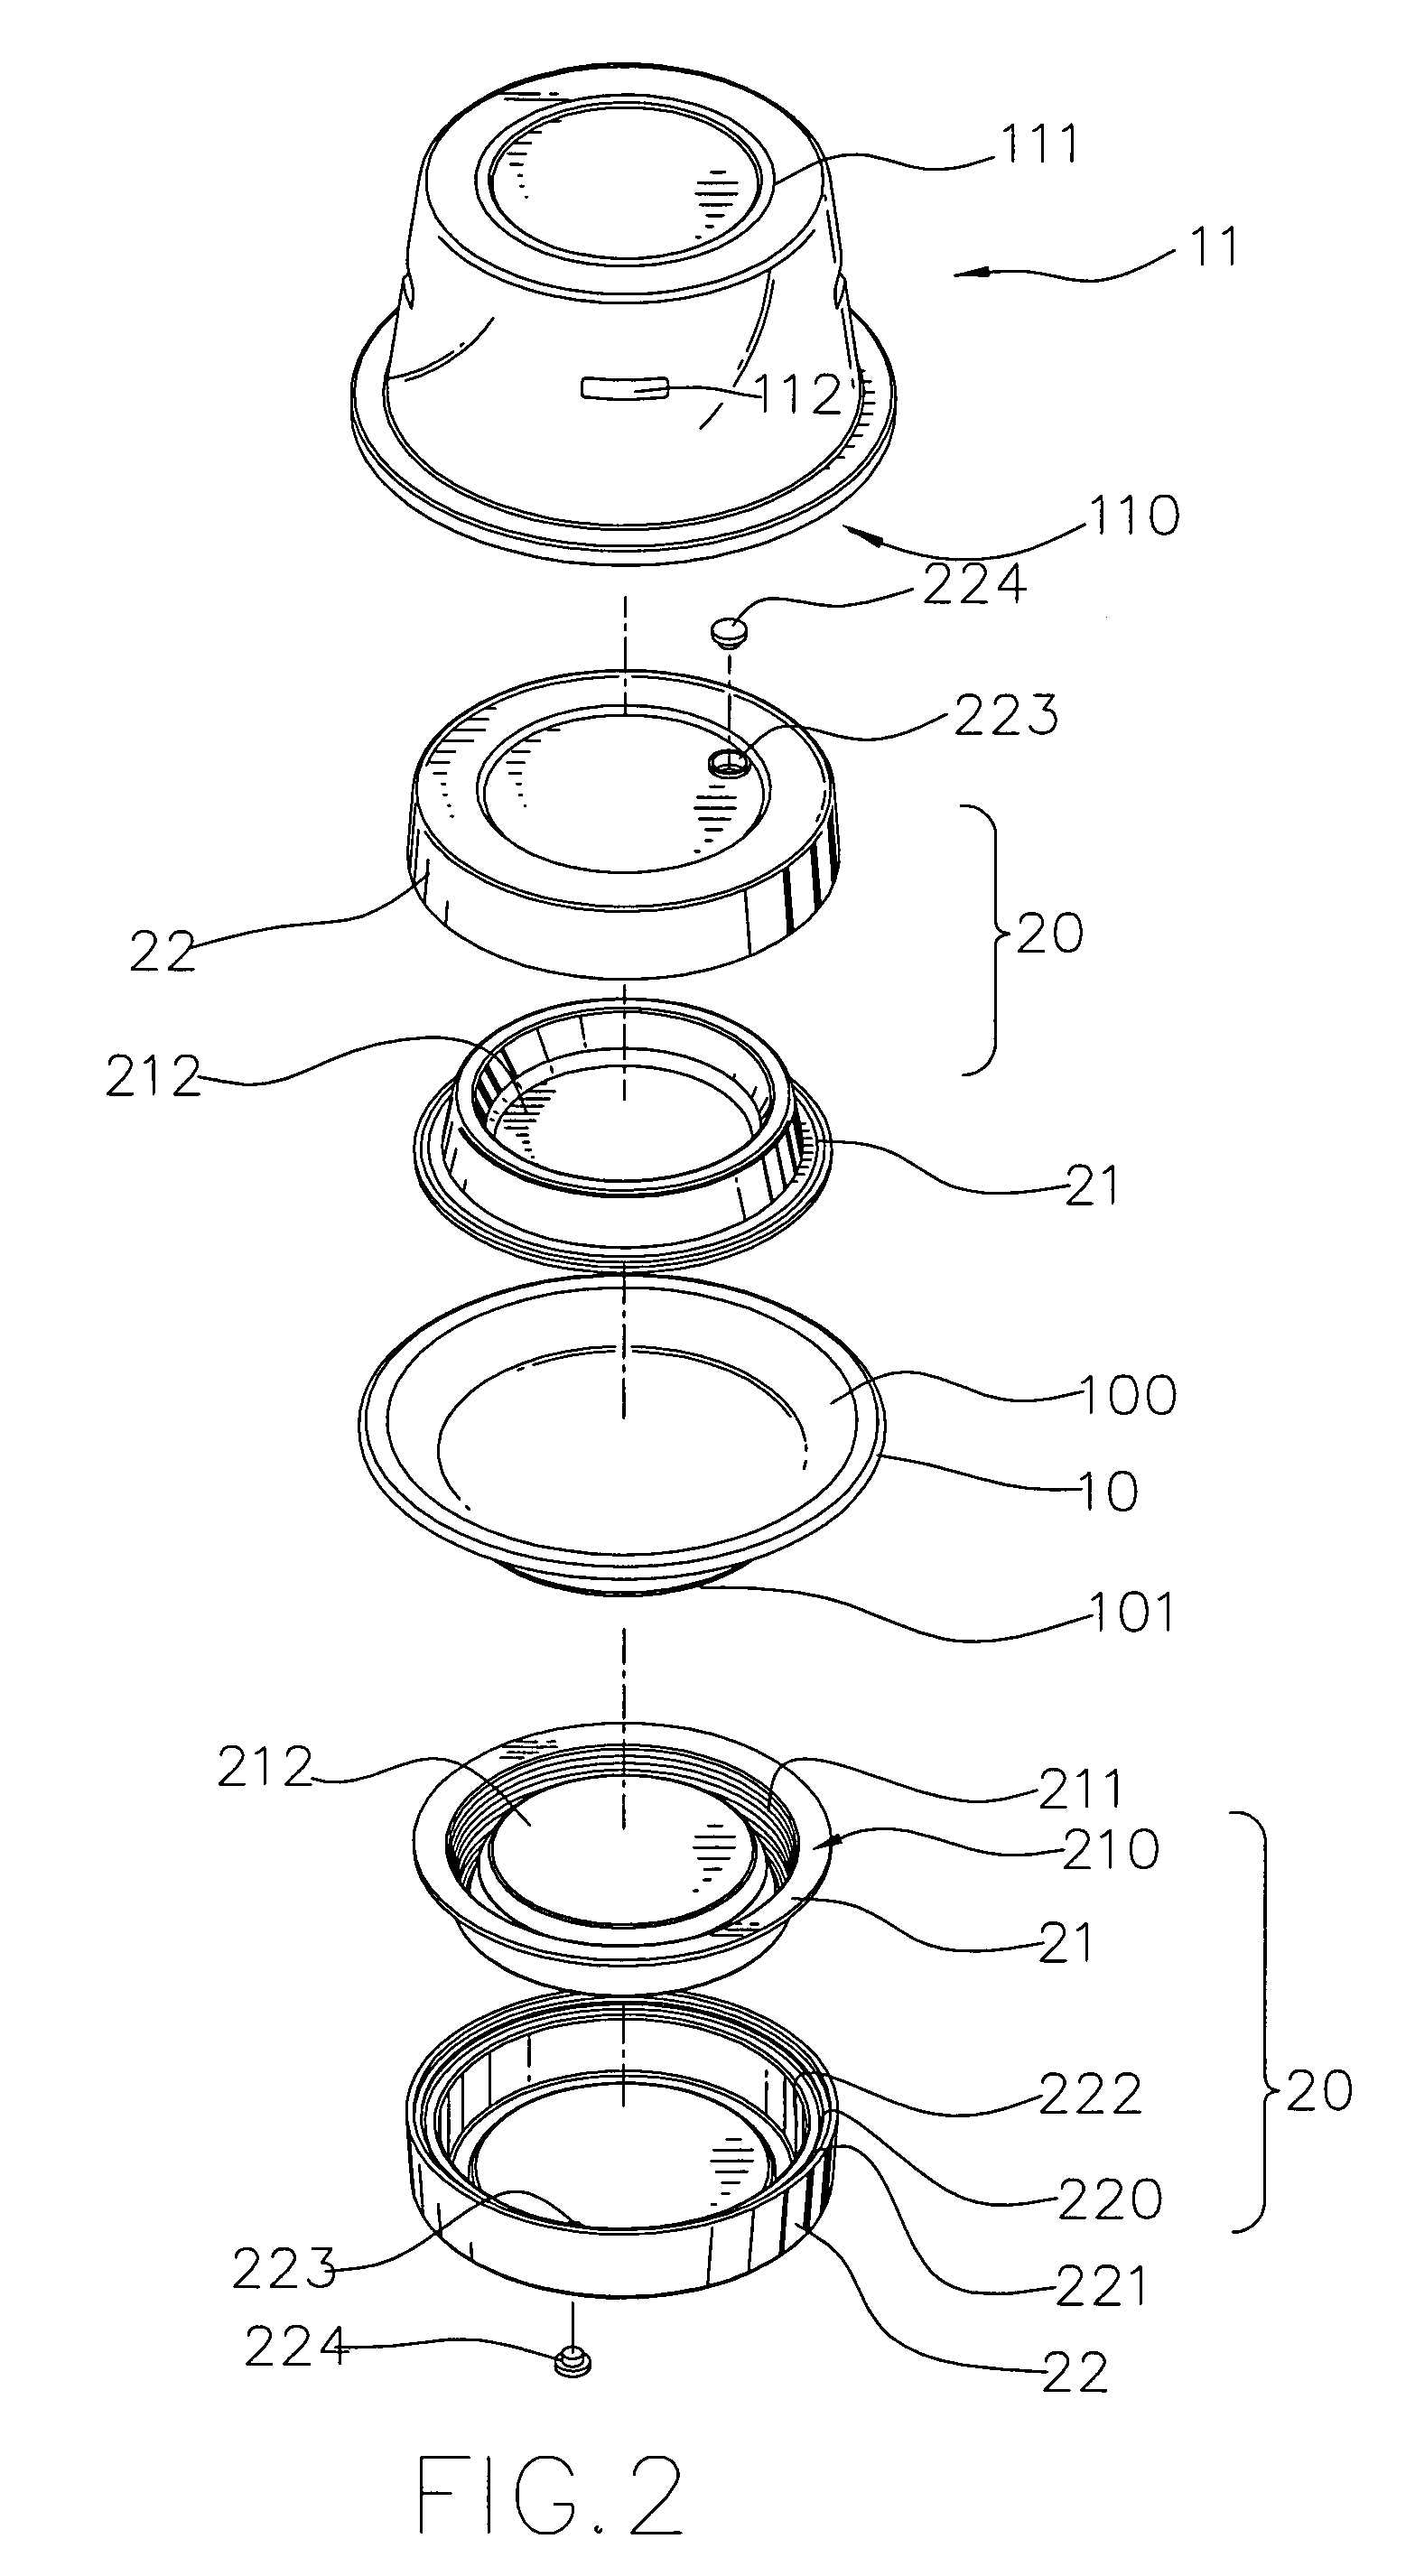 Portable heat exchanging device